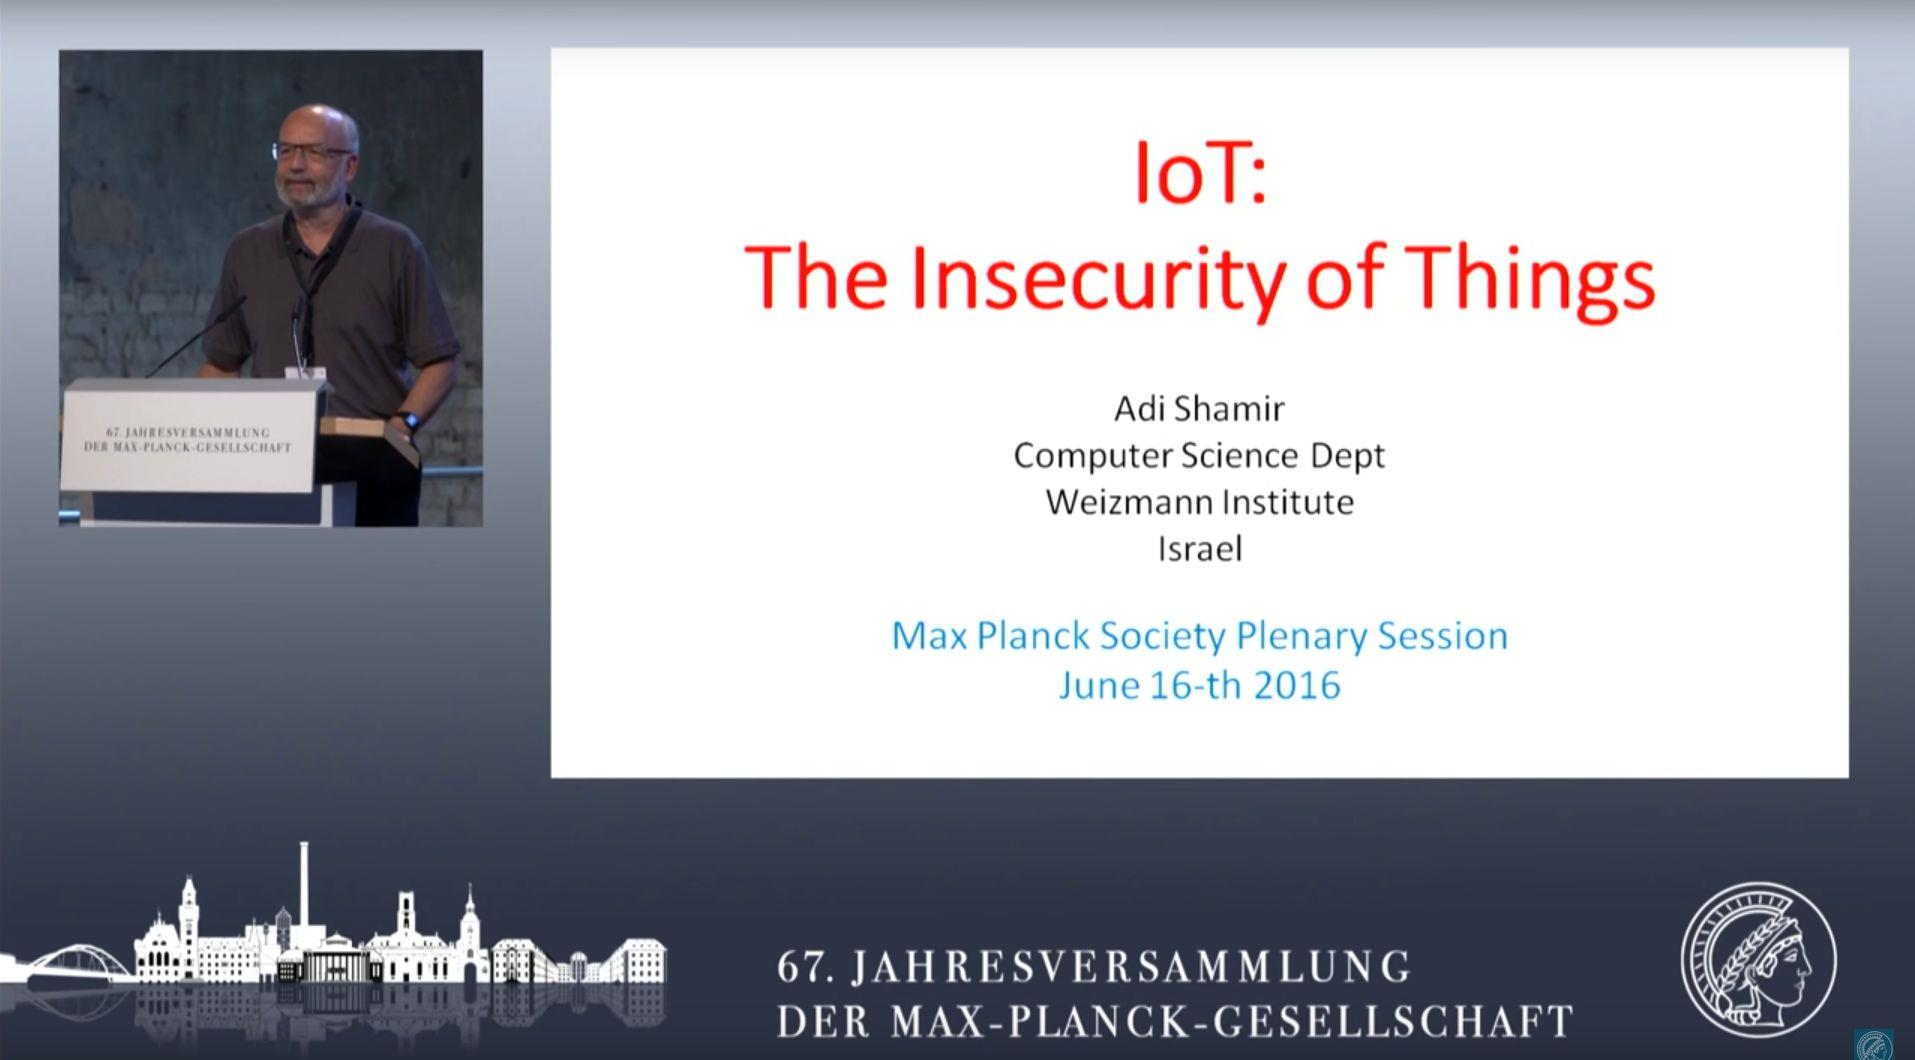 The Insecurity of Things (https://www.mpg.